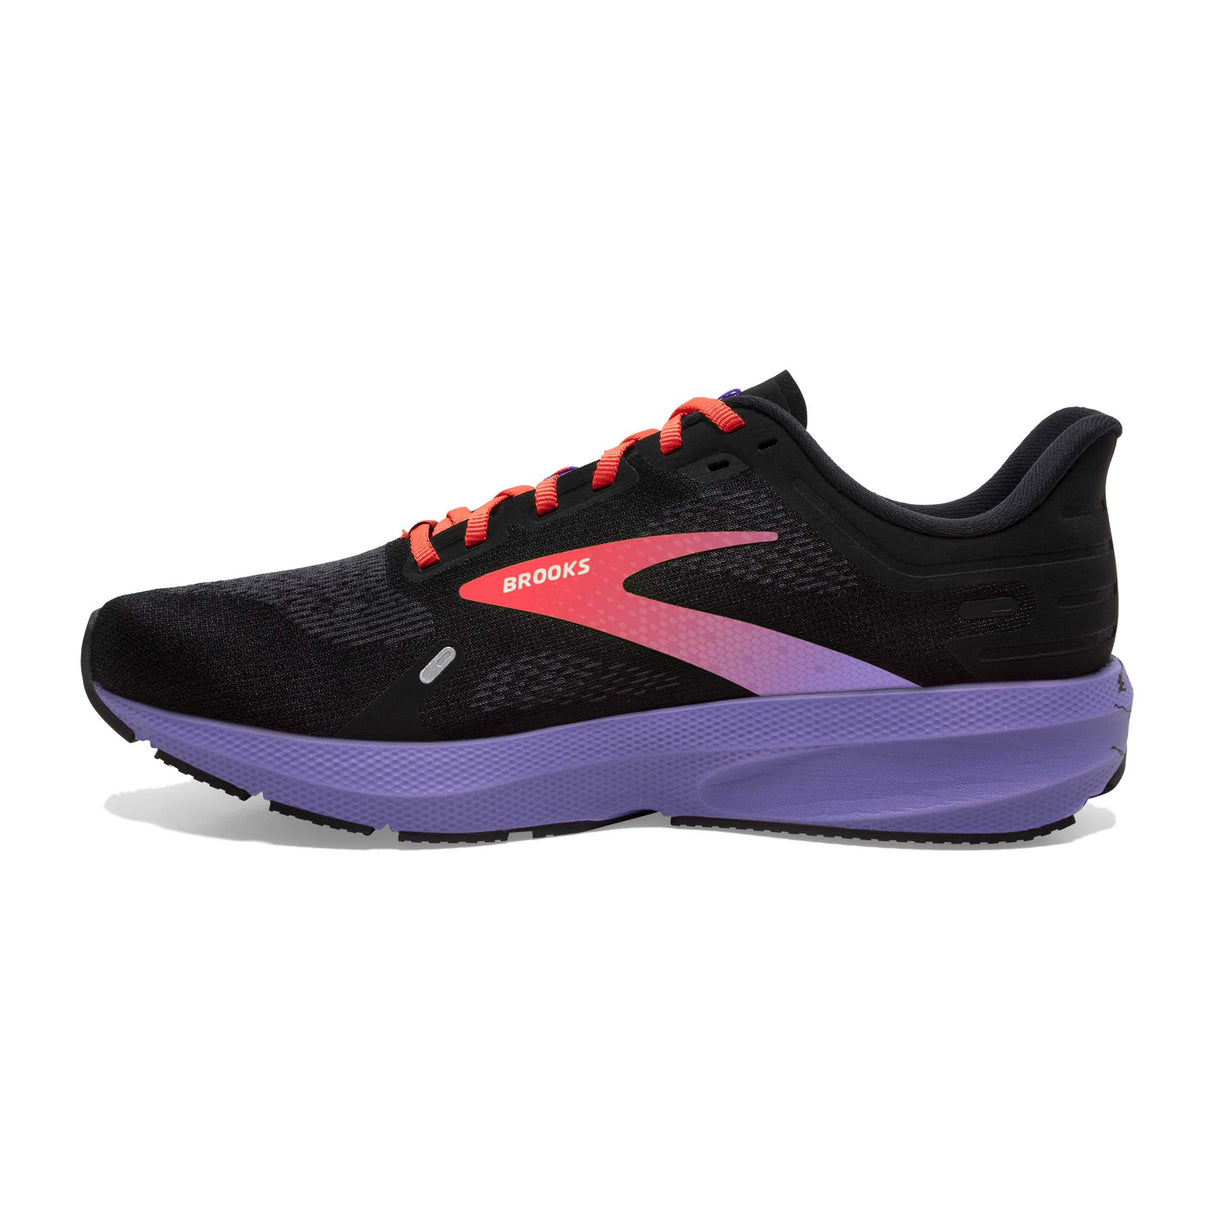 Brooks Launch 9 running femme lateral- black coral purple